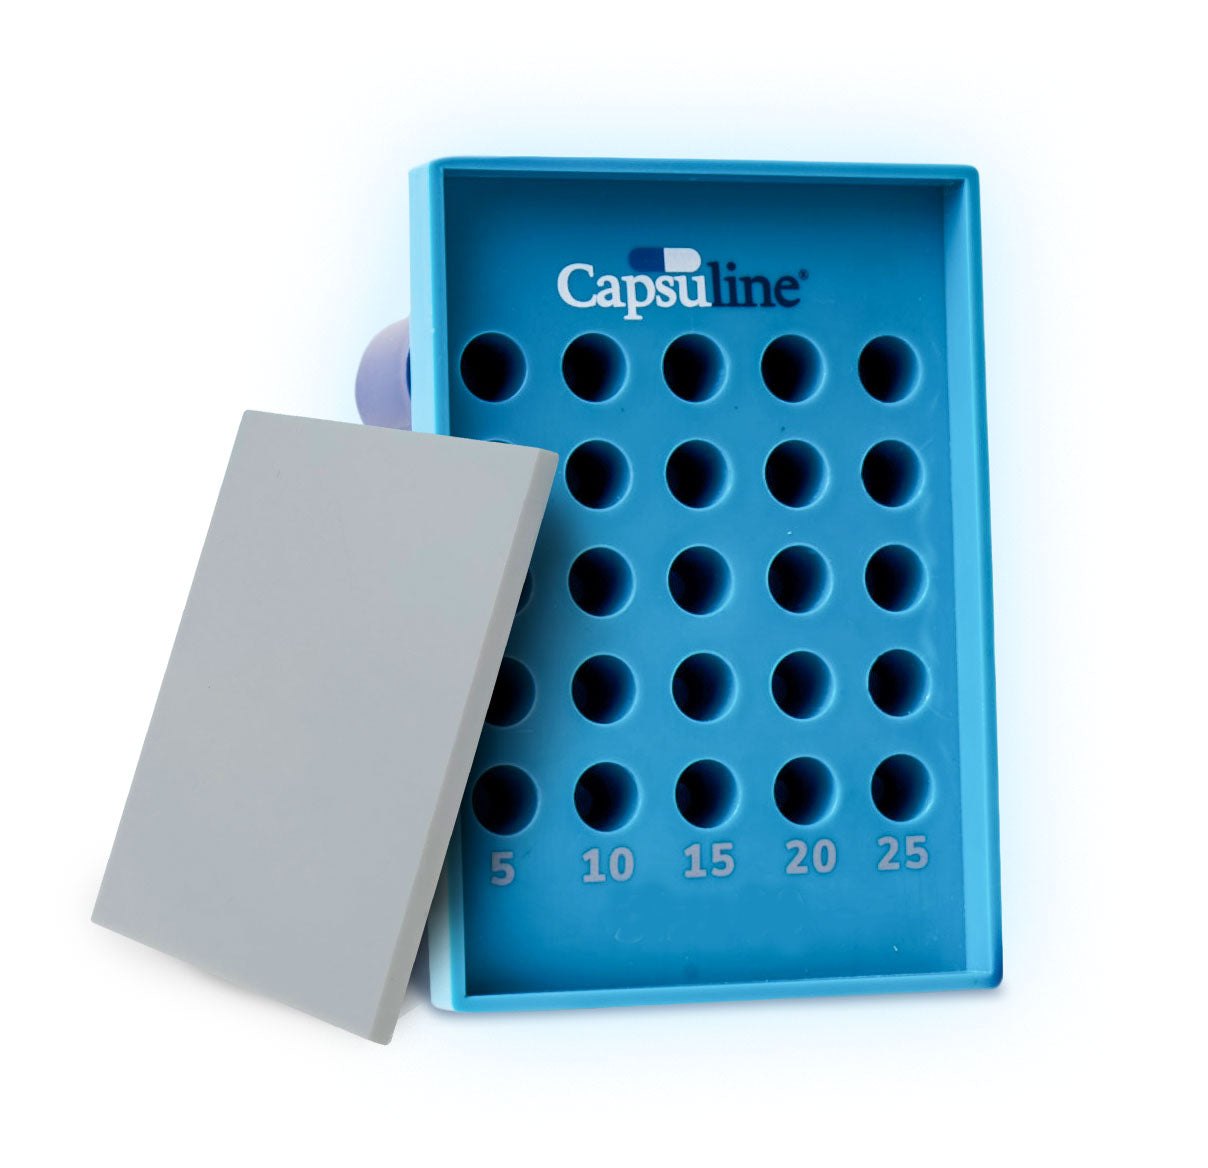 Capsu-TRAY manual capsule filling tray by Capsuline - Suitable for Size 000 capsules - 25 Count - 000